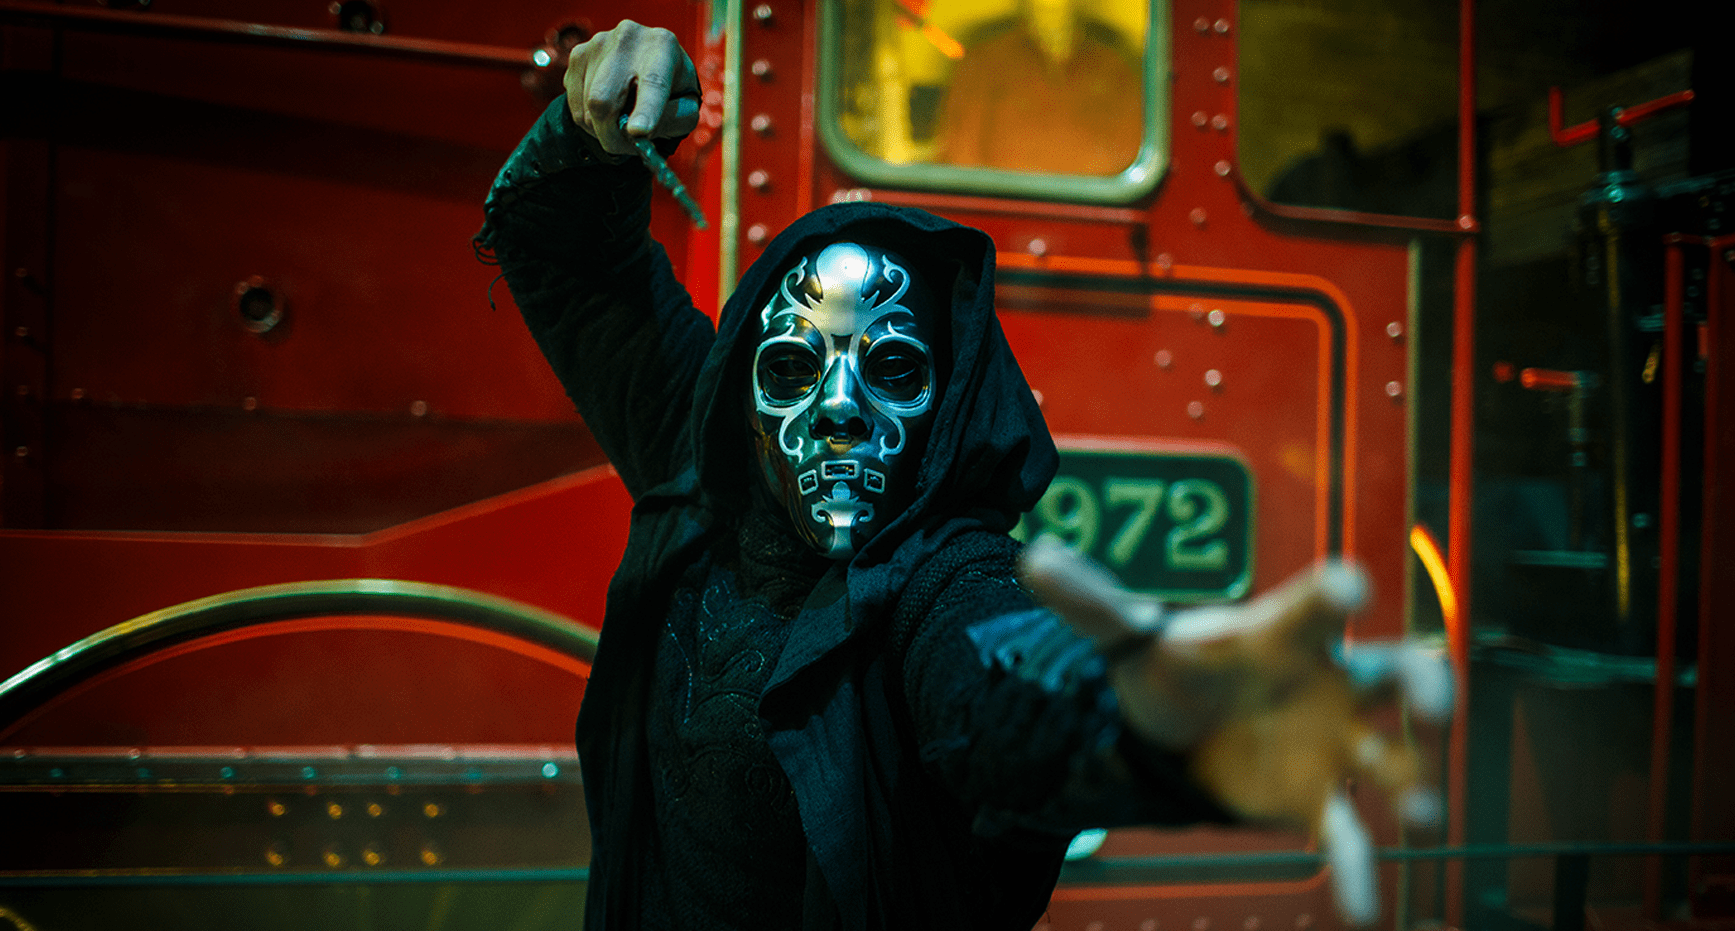 A Death Eater in front of the Hogwarts Express